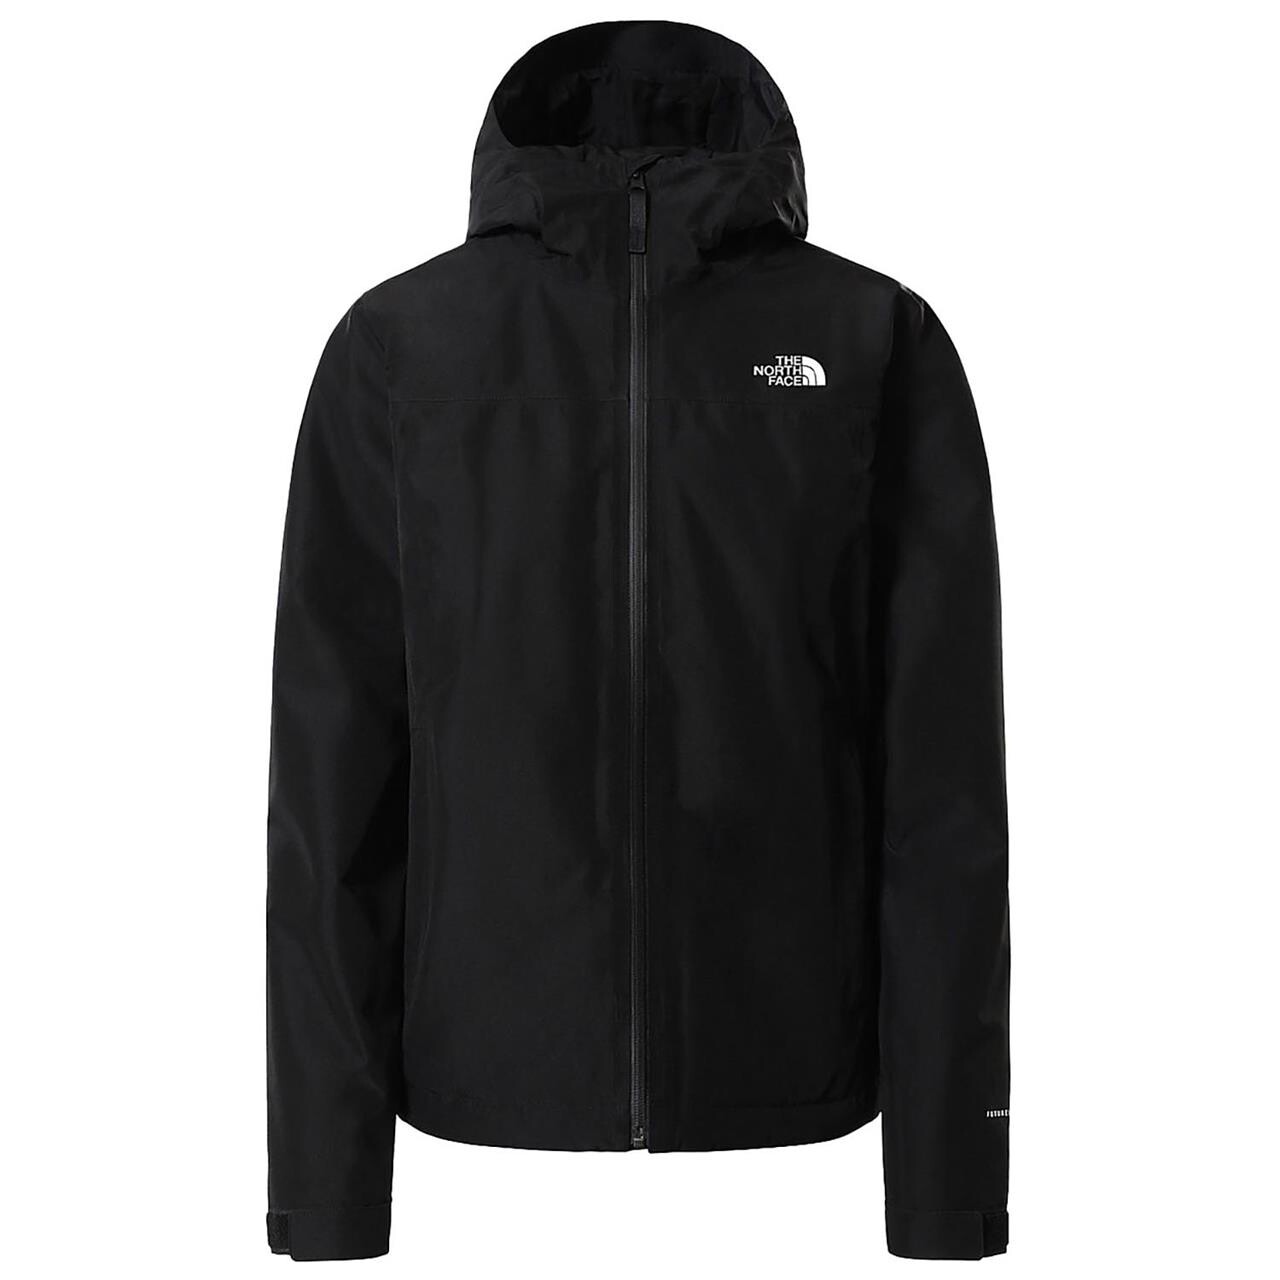 Billede af The North Face Womens Dryzzle Insulated Futurelight Jacket (Sort (TNF BLACK) Small)